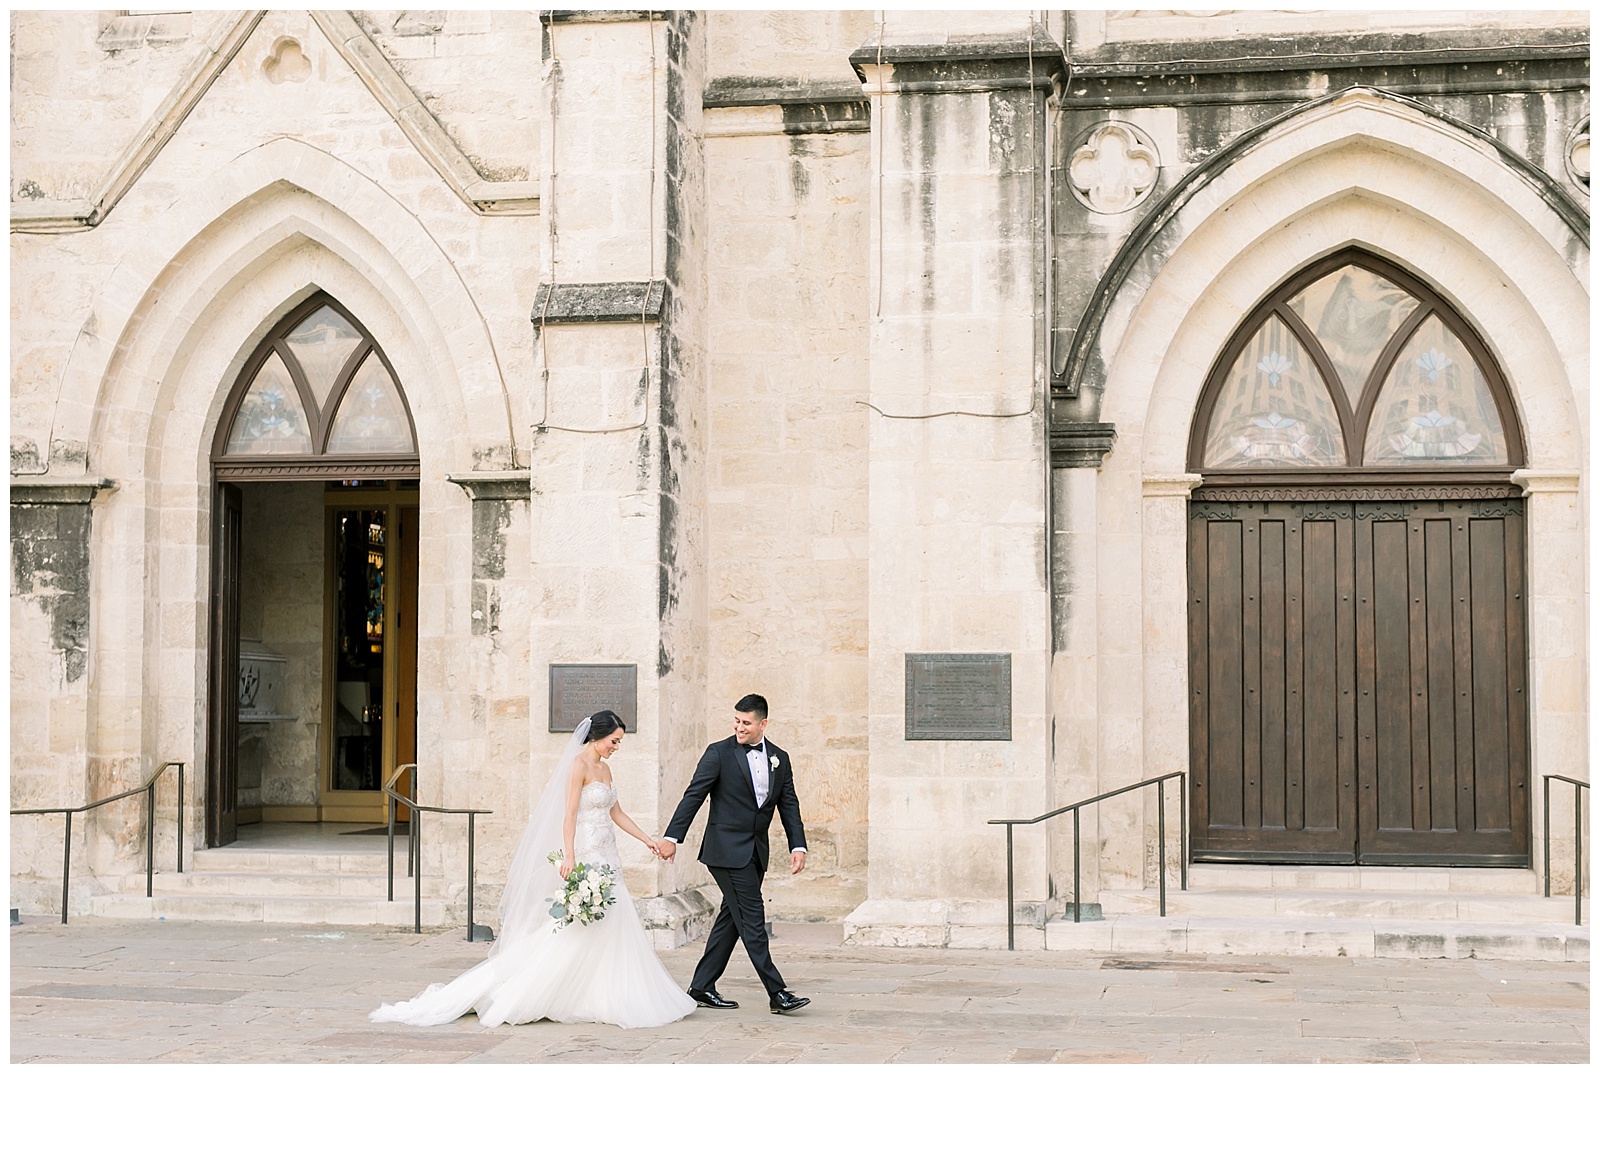 I love this bride and groom walking for their timeless wedding for A San Fernando Cathedral Wedding in San Antonio, TX | Monica Roberts Photography | www.monicaroberts.com | San Antonio Wedding Photographer